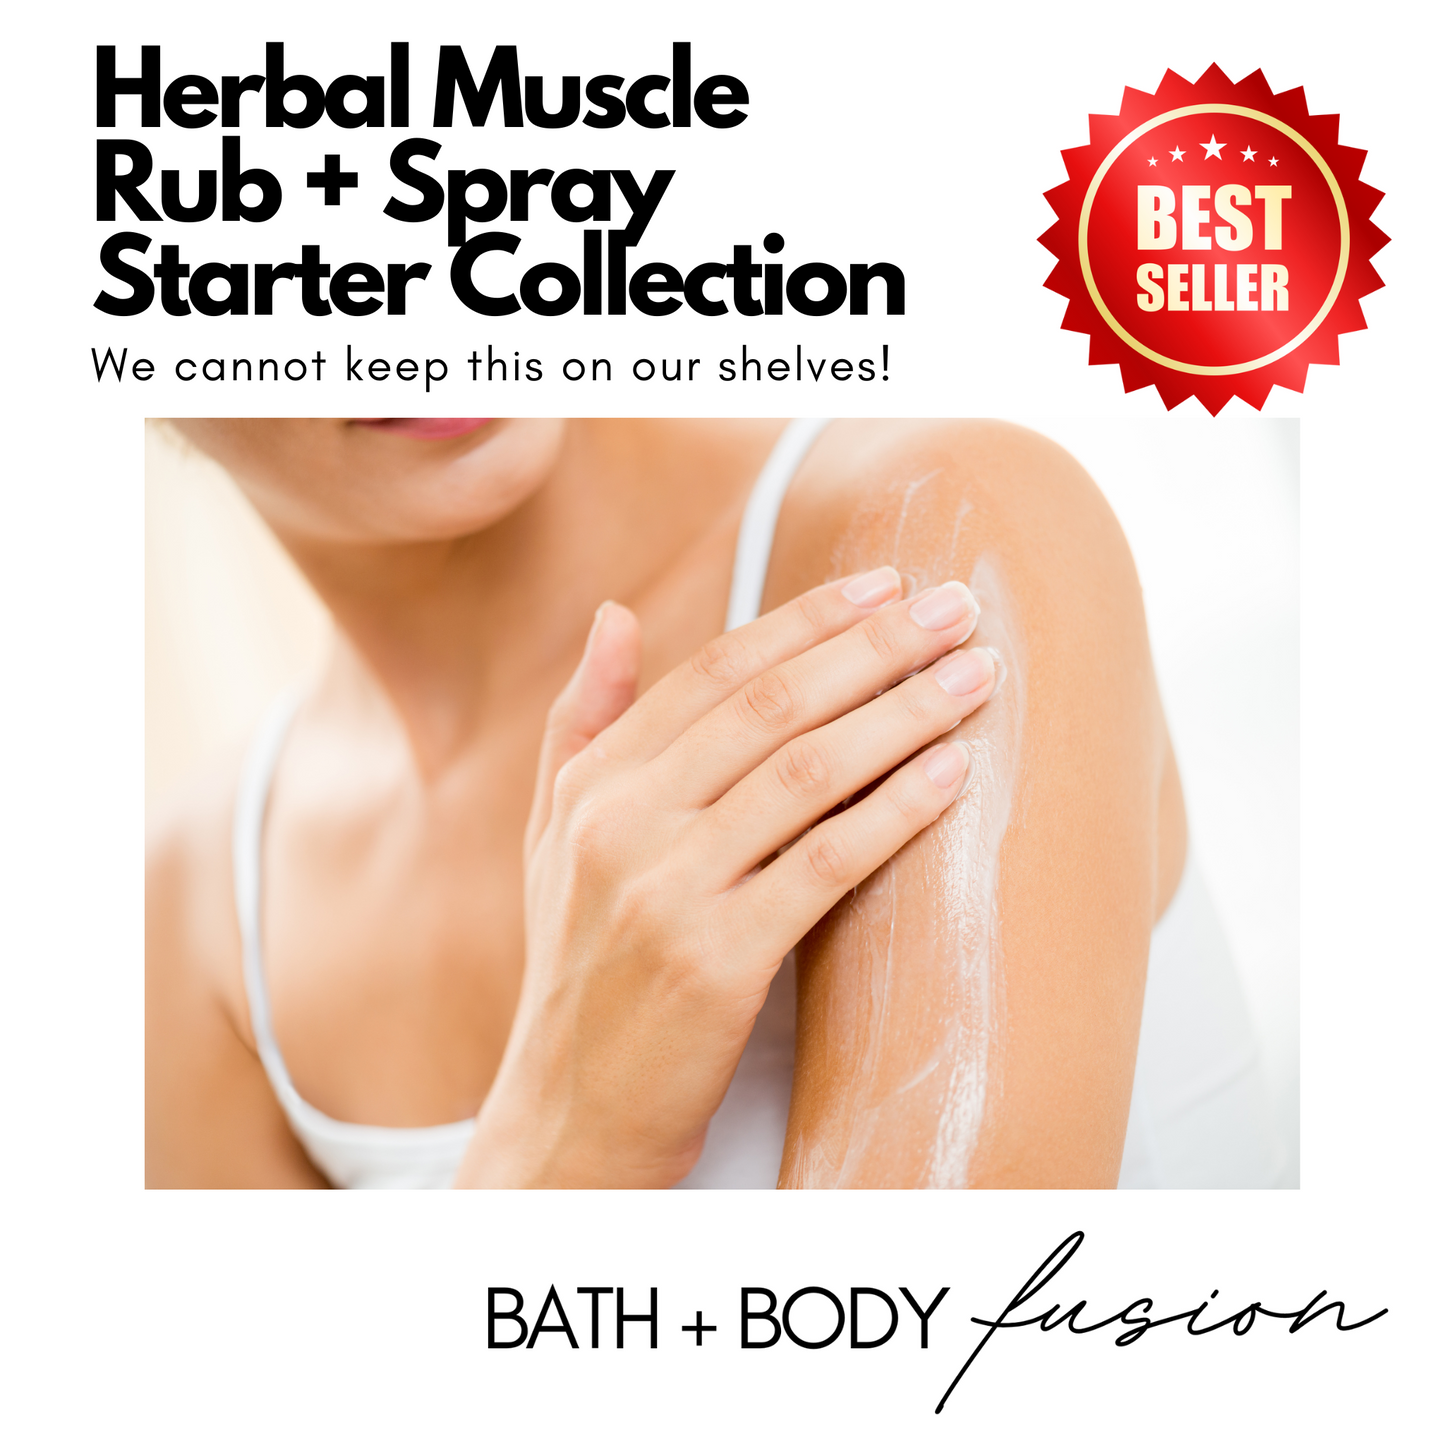 Herbal Muscle Rub + Spray Starter Collection (Qty 12)